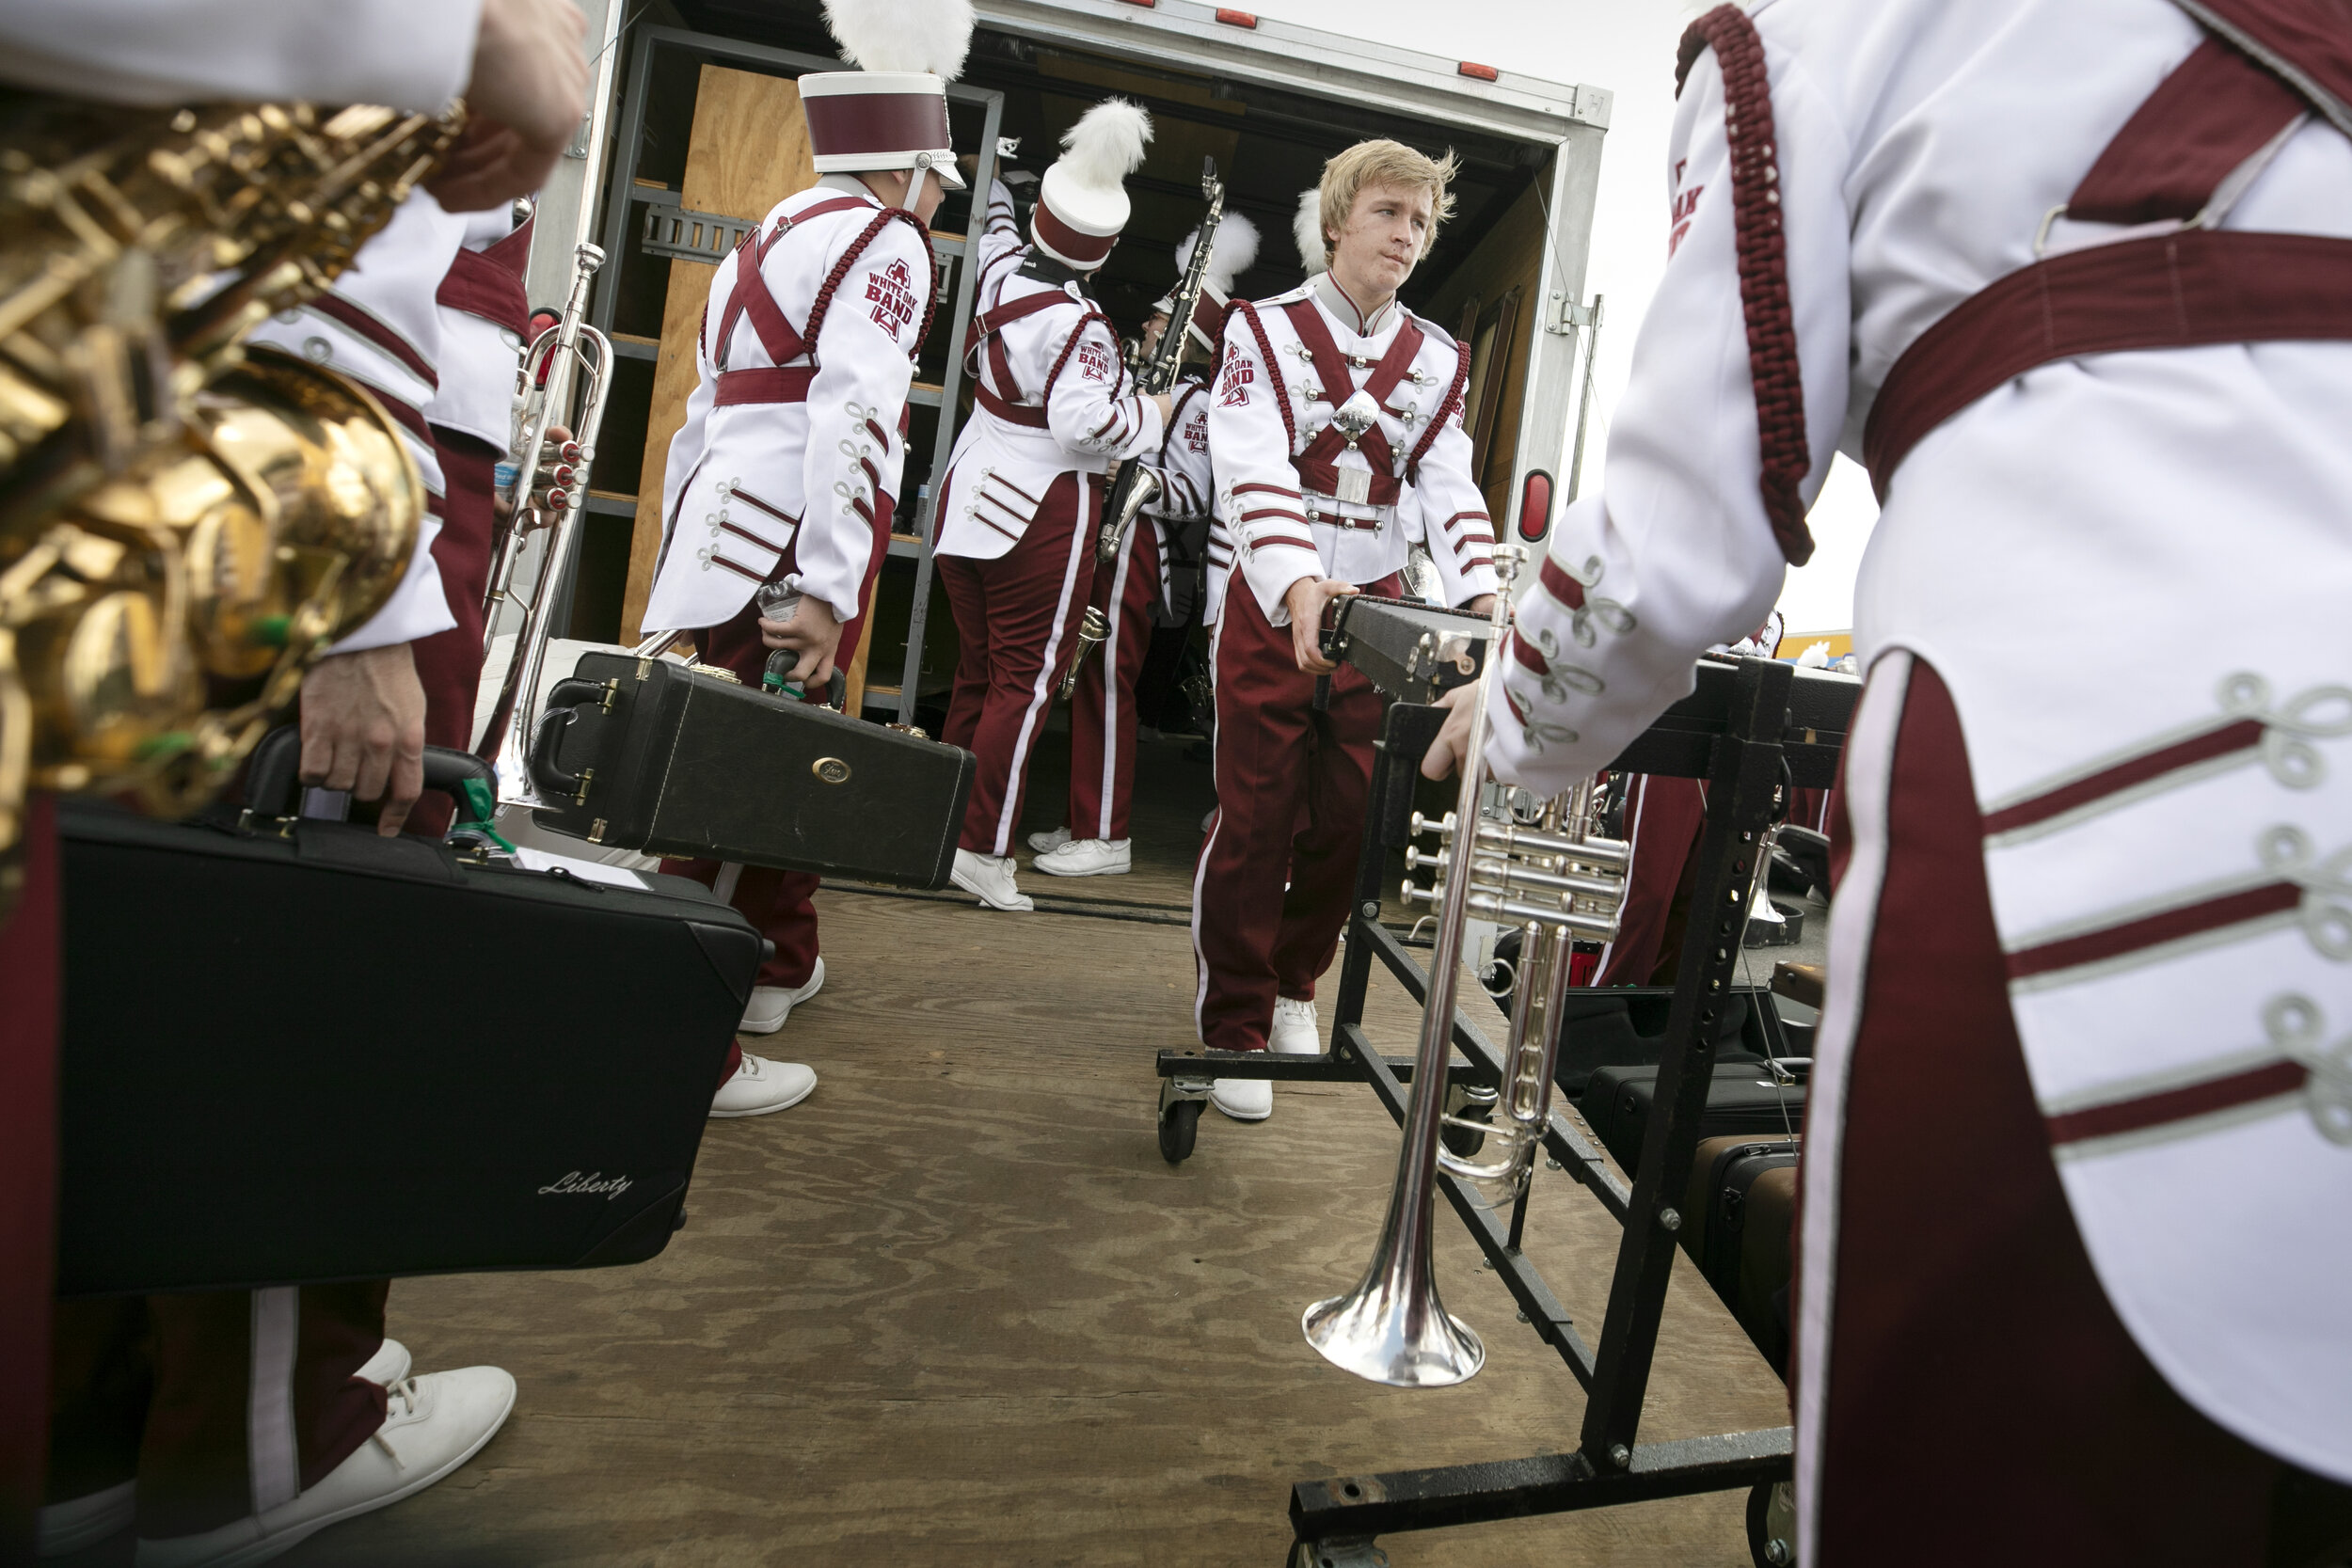  White Oak High School students unload their instruments before the UIL State Marching Band competition. 